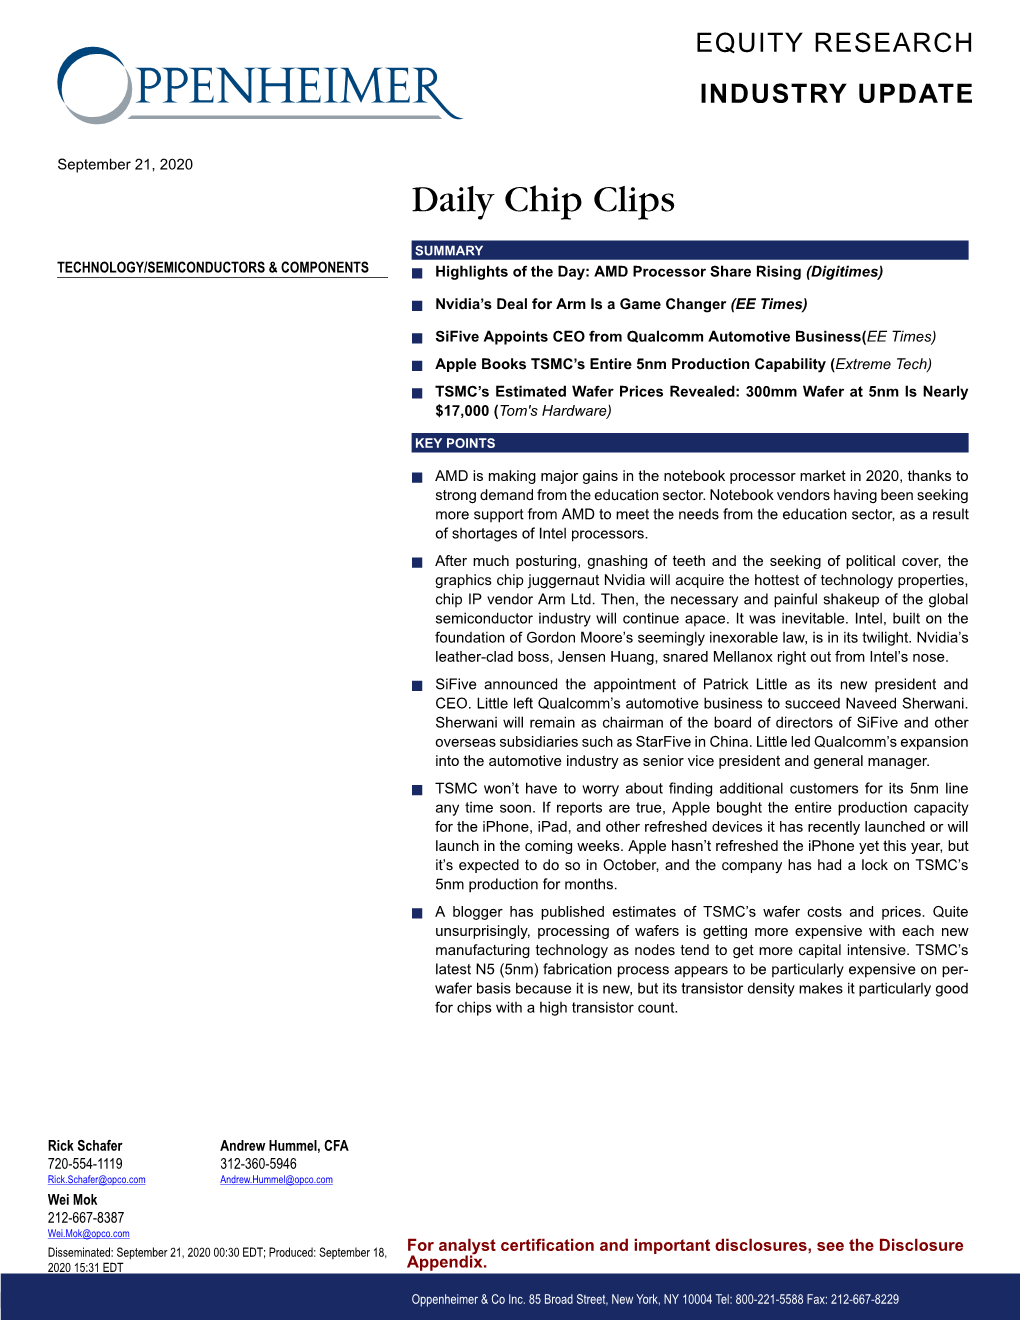 Daily Chip Clips